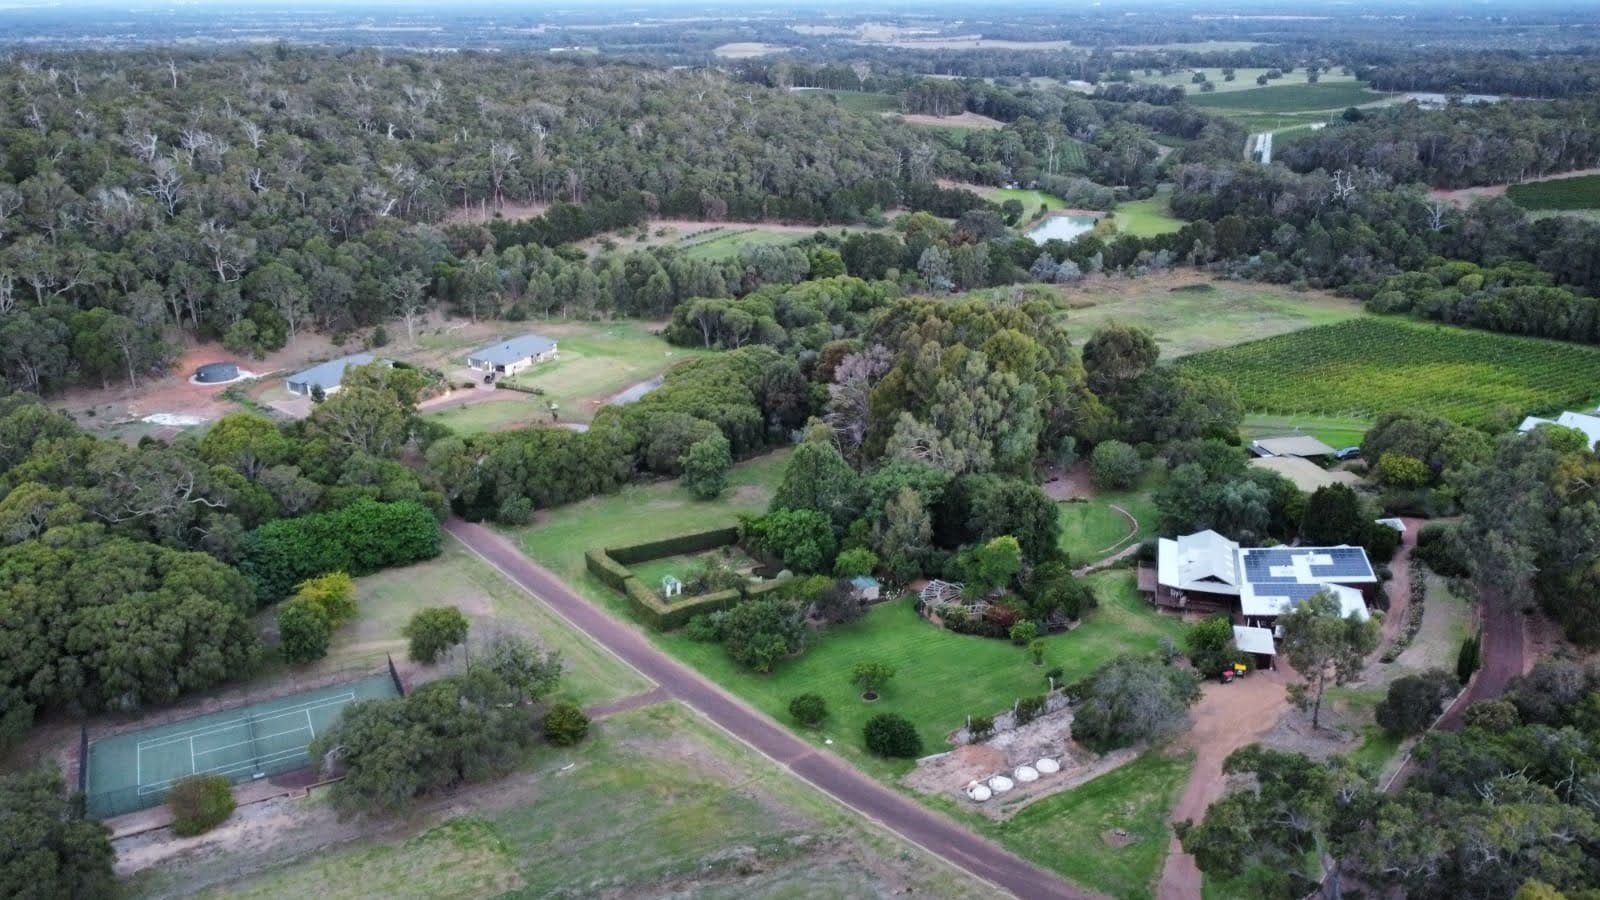 Aerial view of Rivendell Winery Estate 